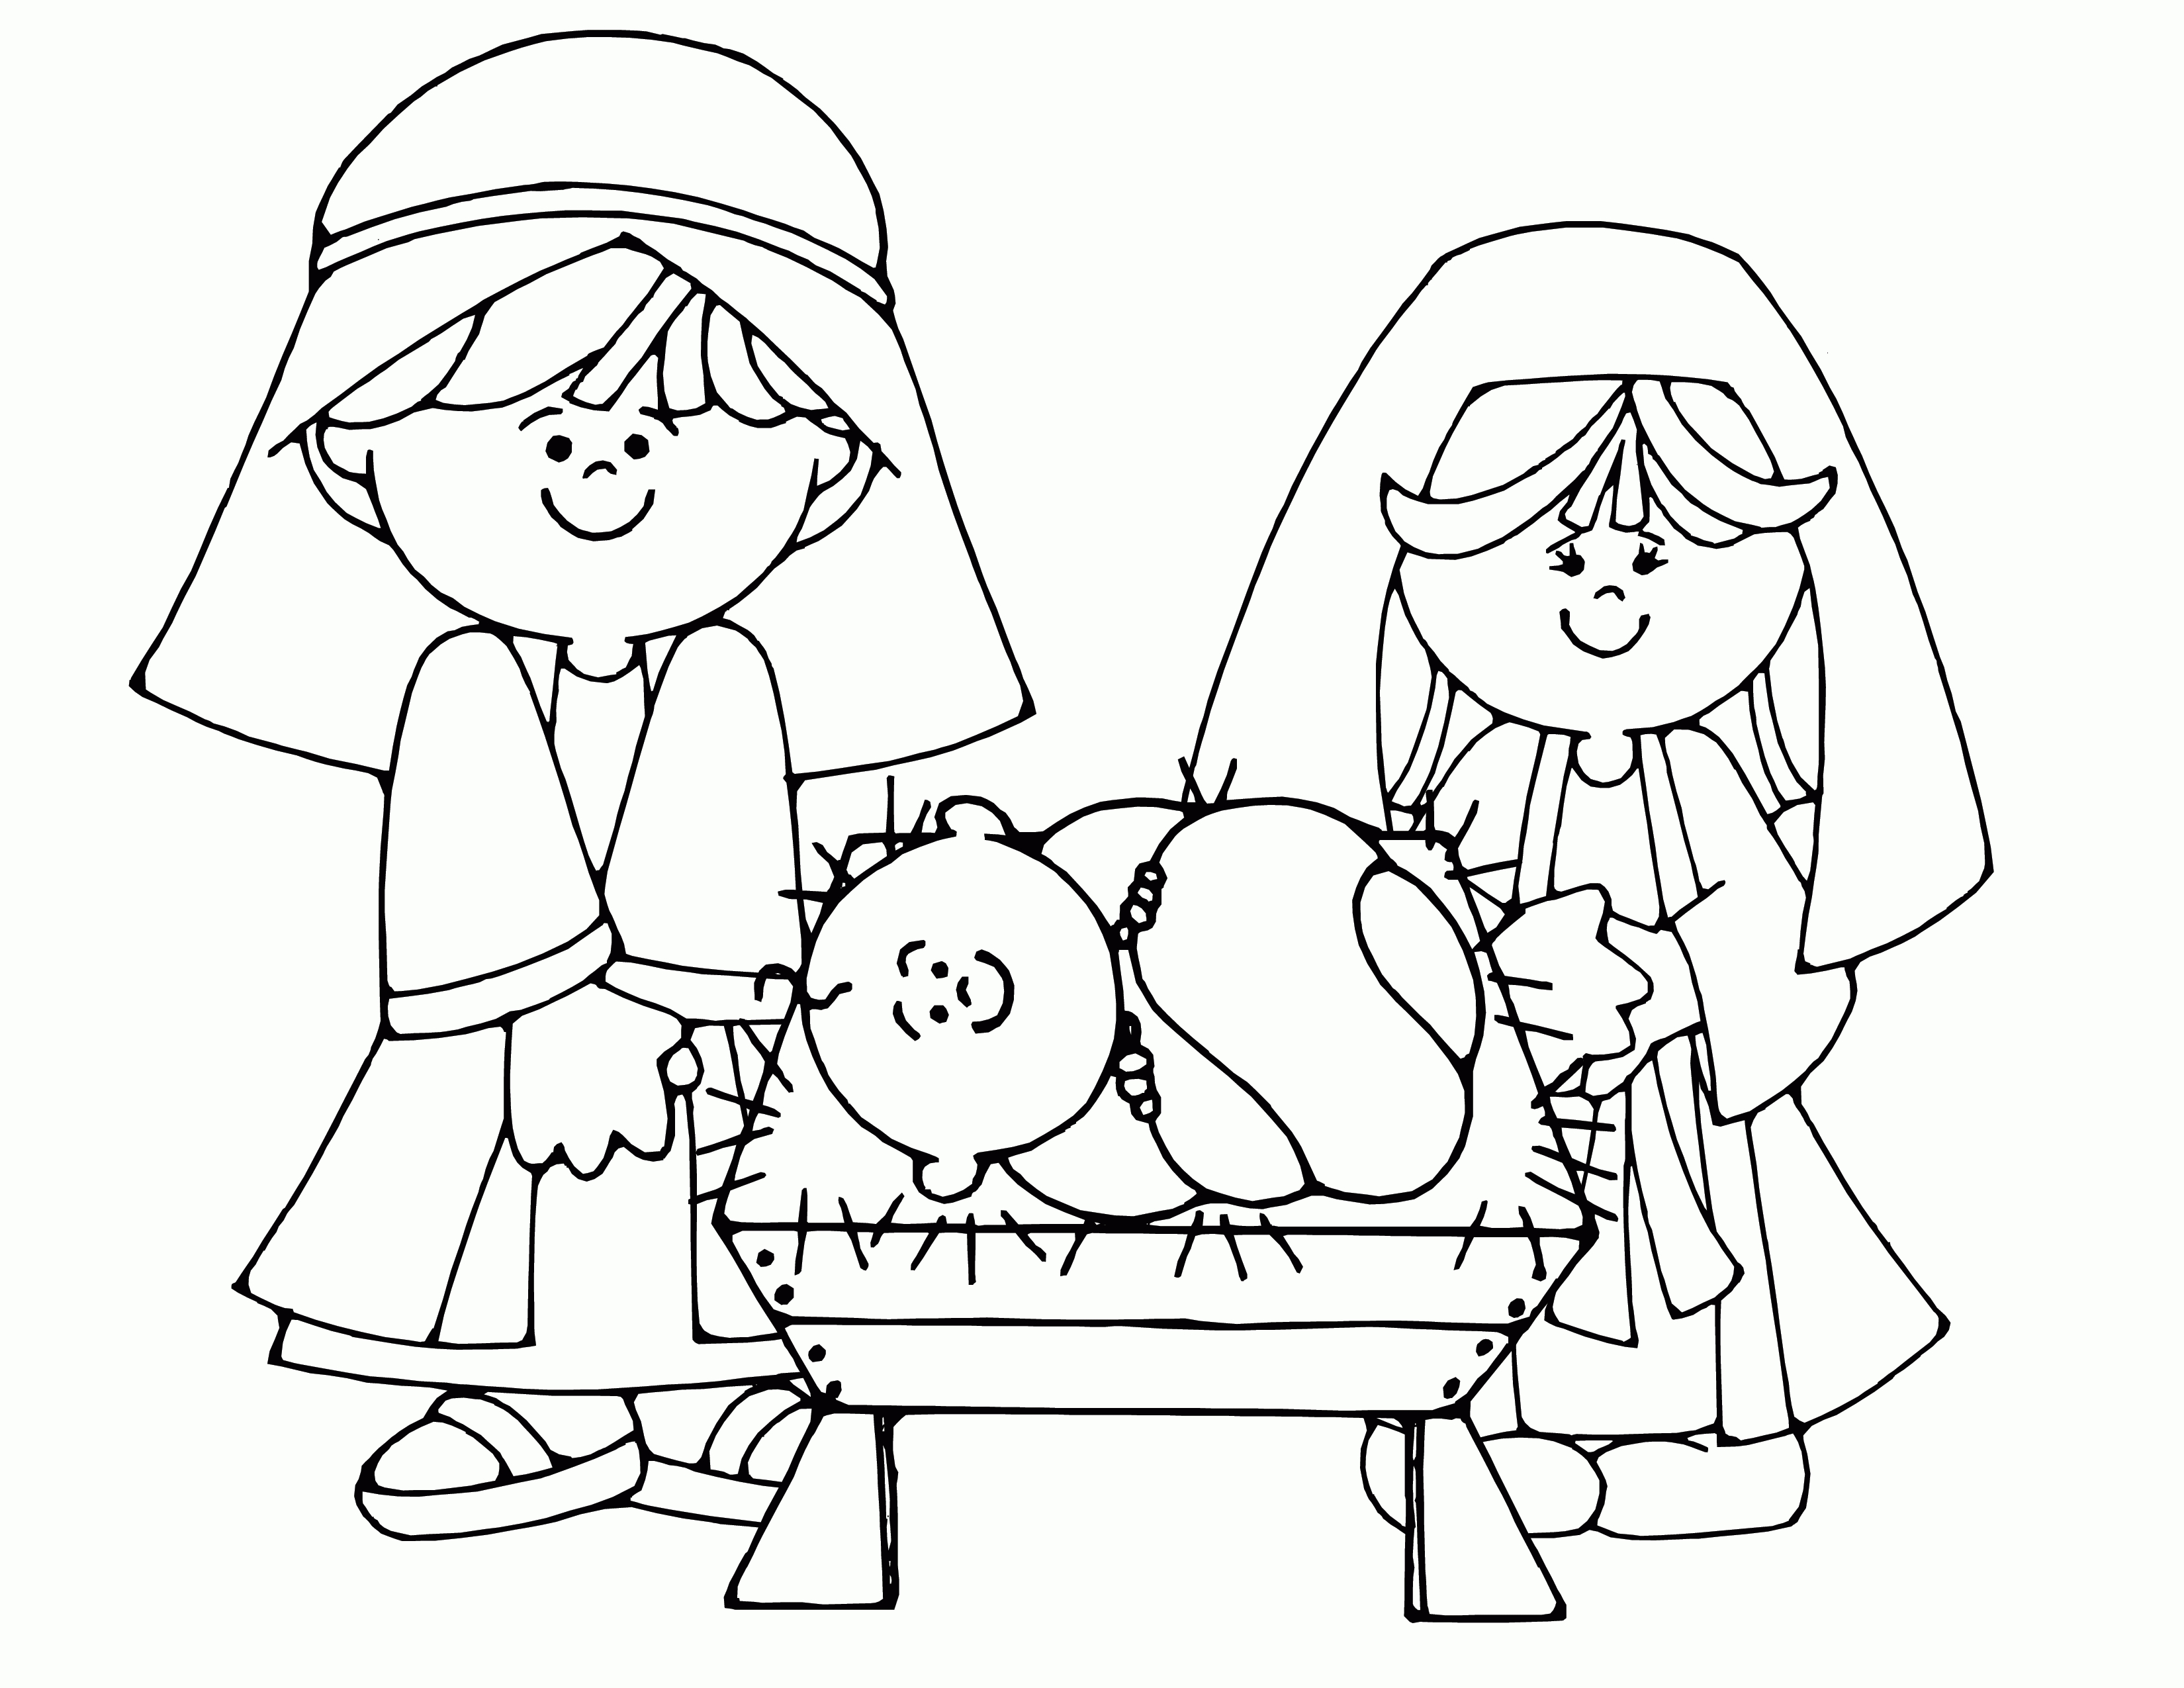 Free Printable Nativity Scene Coloring Pages Nativity Coloring - Free Printable Nativity Scene Pictures